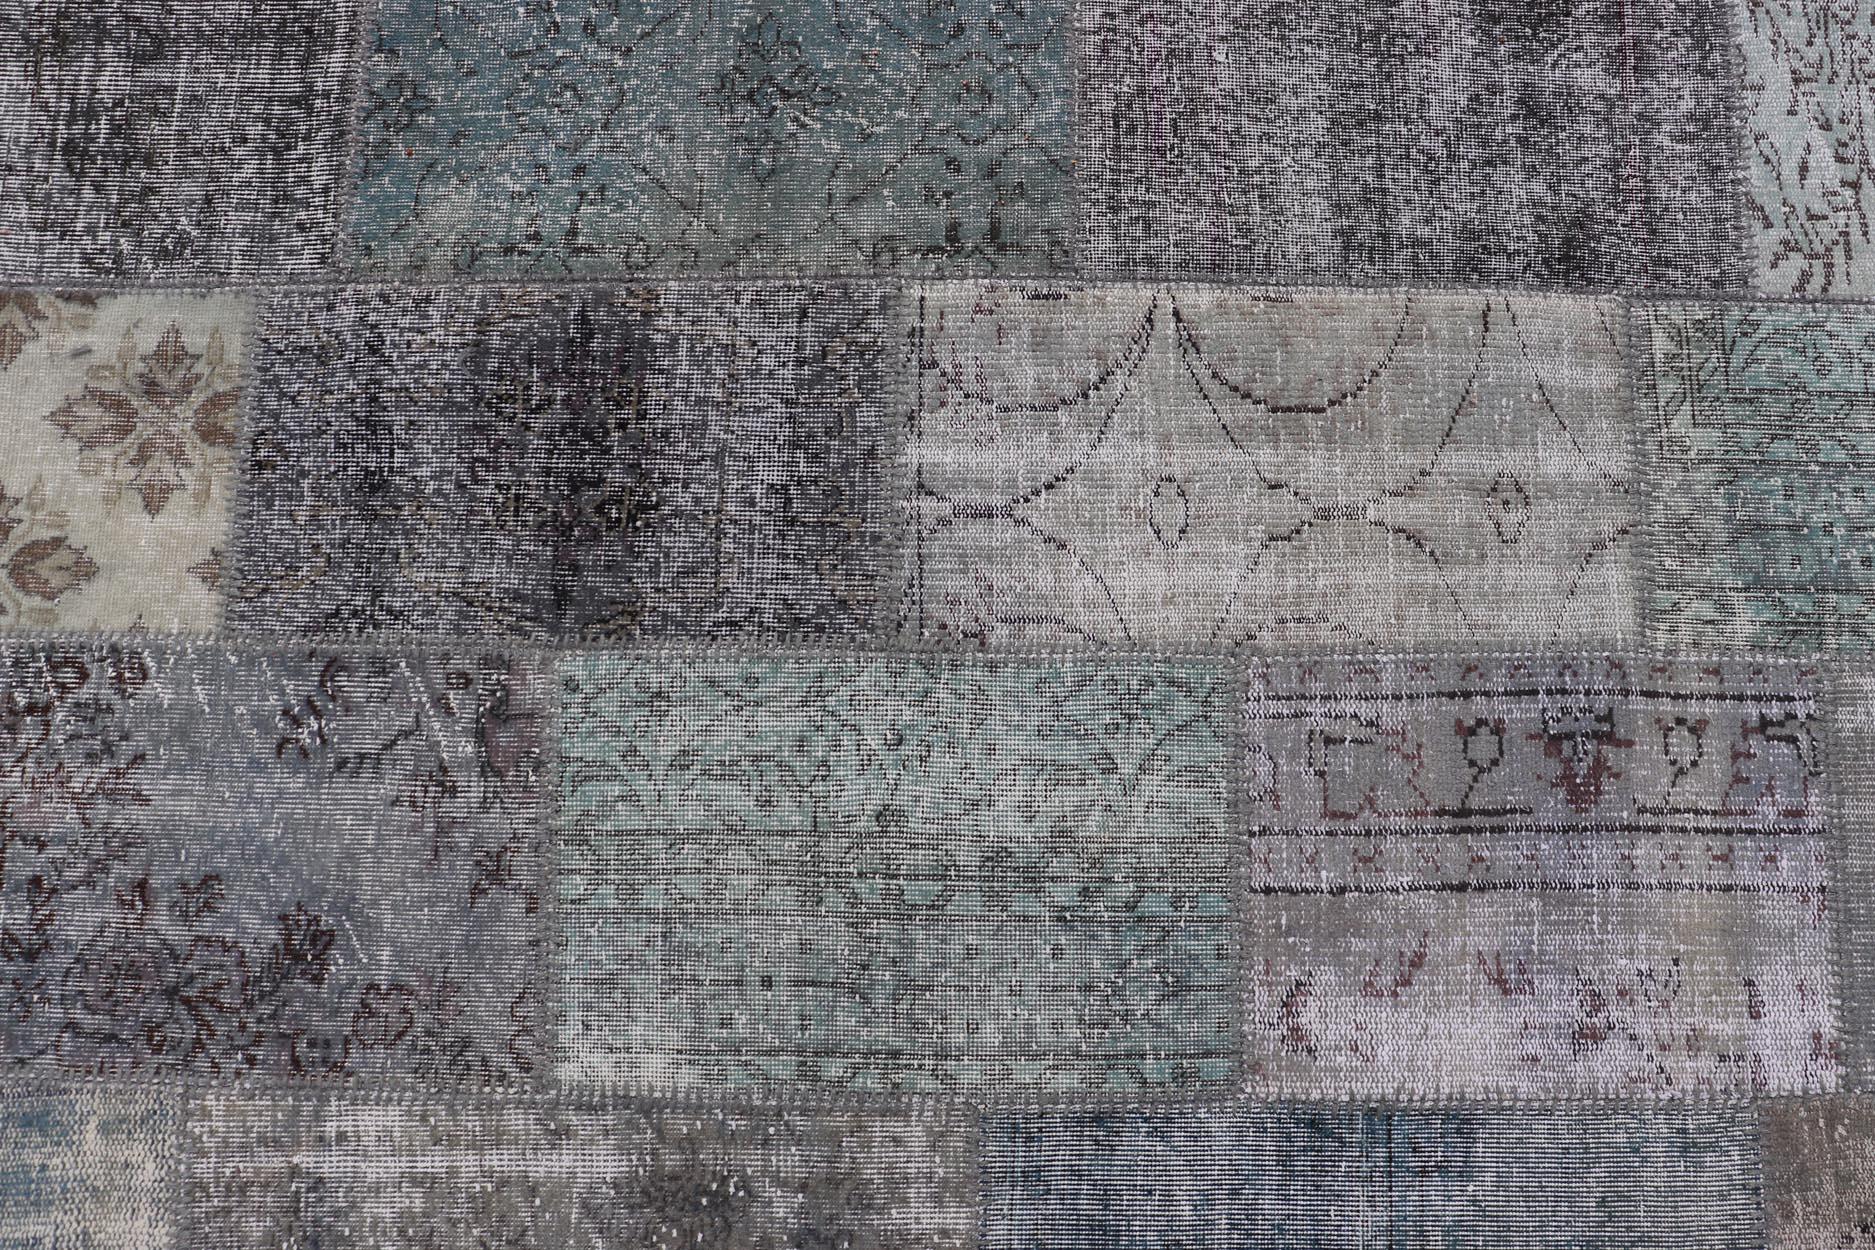 Large Turkish Patchwork Rug in Grey, Green, Blue, Brown and Neutral Tones. These rug TU-ERD-7669-TU-ERD-7671, country of origin / type: Turkey / Mid-Century Modern, circa Mid-20th century.
Measures: 13'4 x 20'4.
This vintage Turkish rug is composed